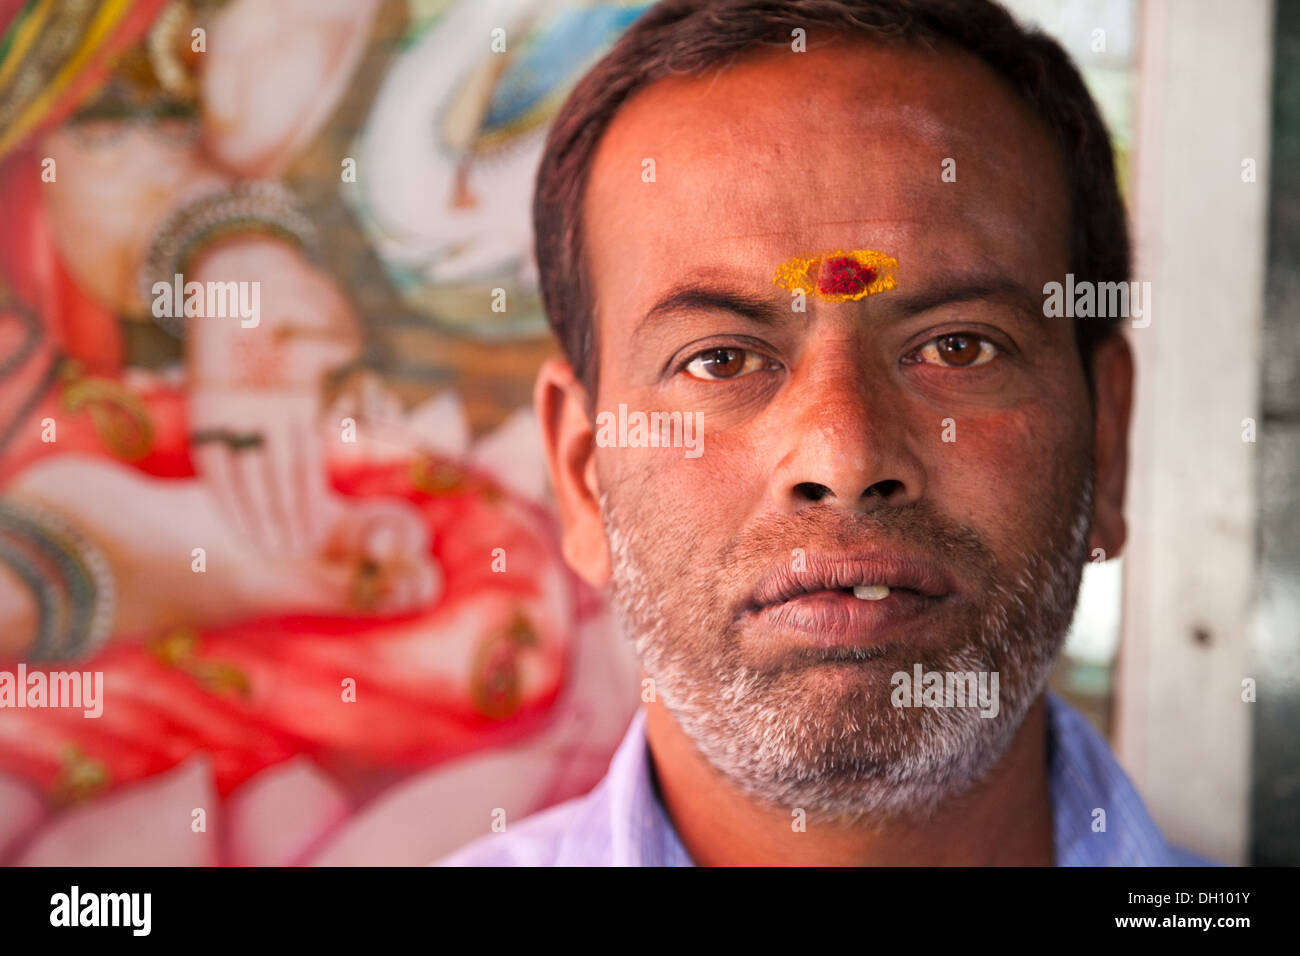 Close up portrait of an Indian man Stock Photo